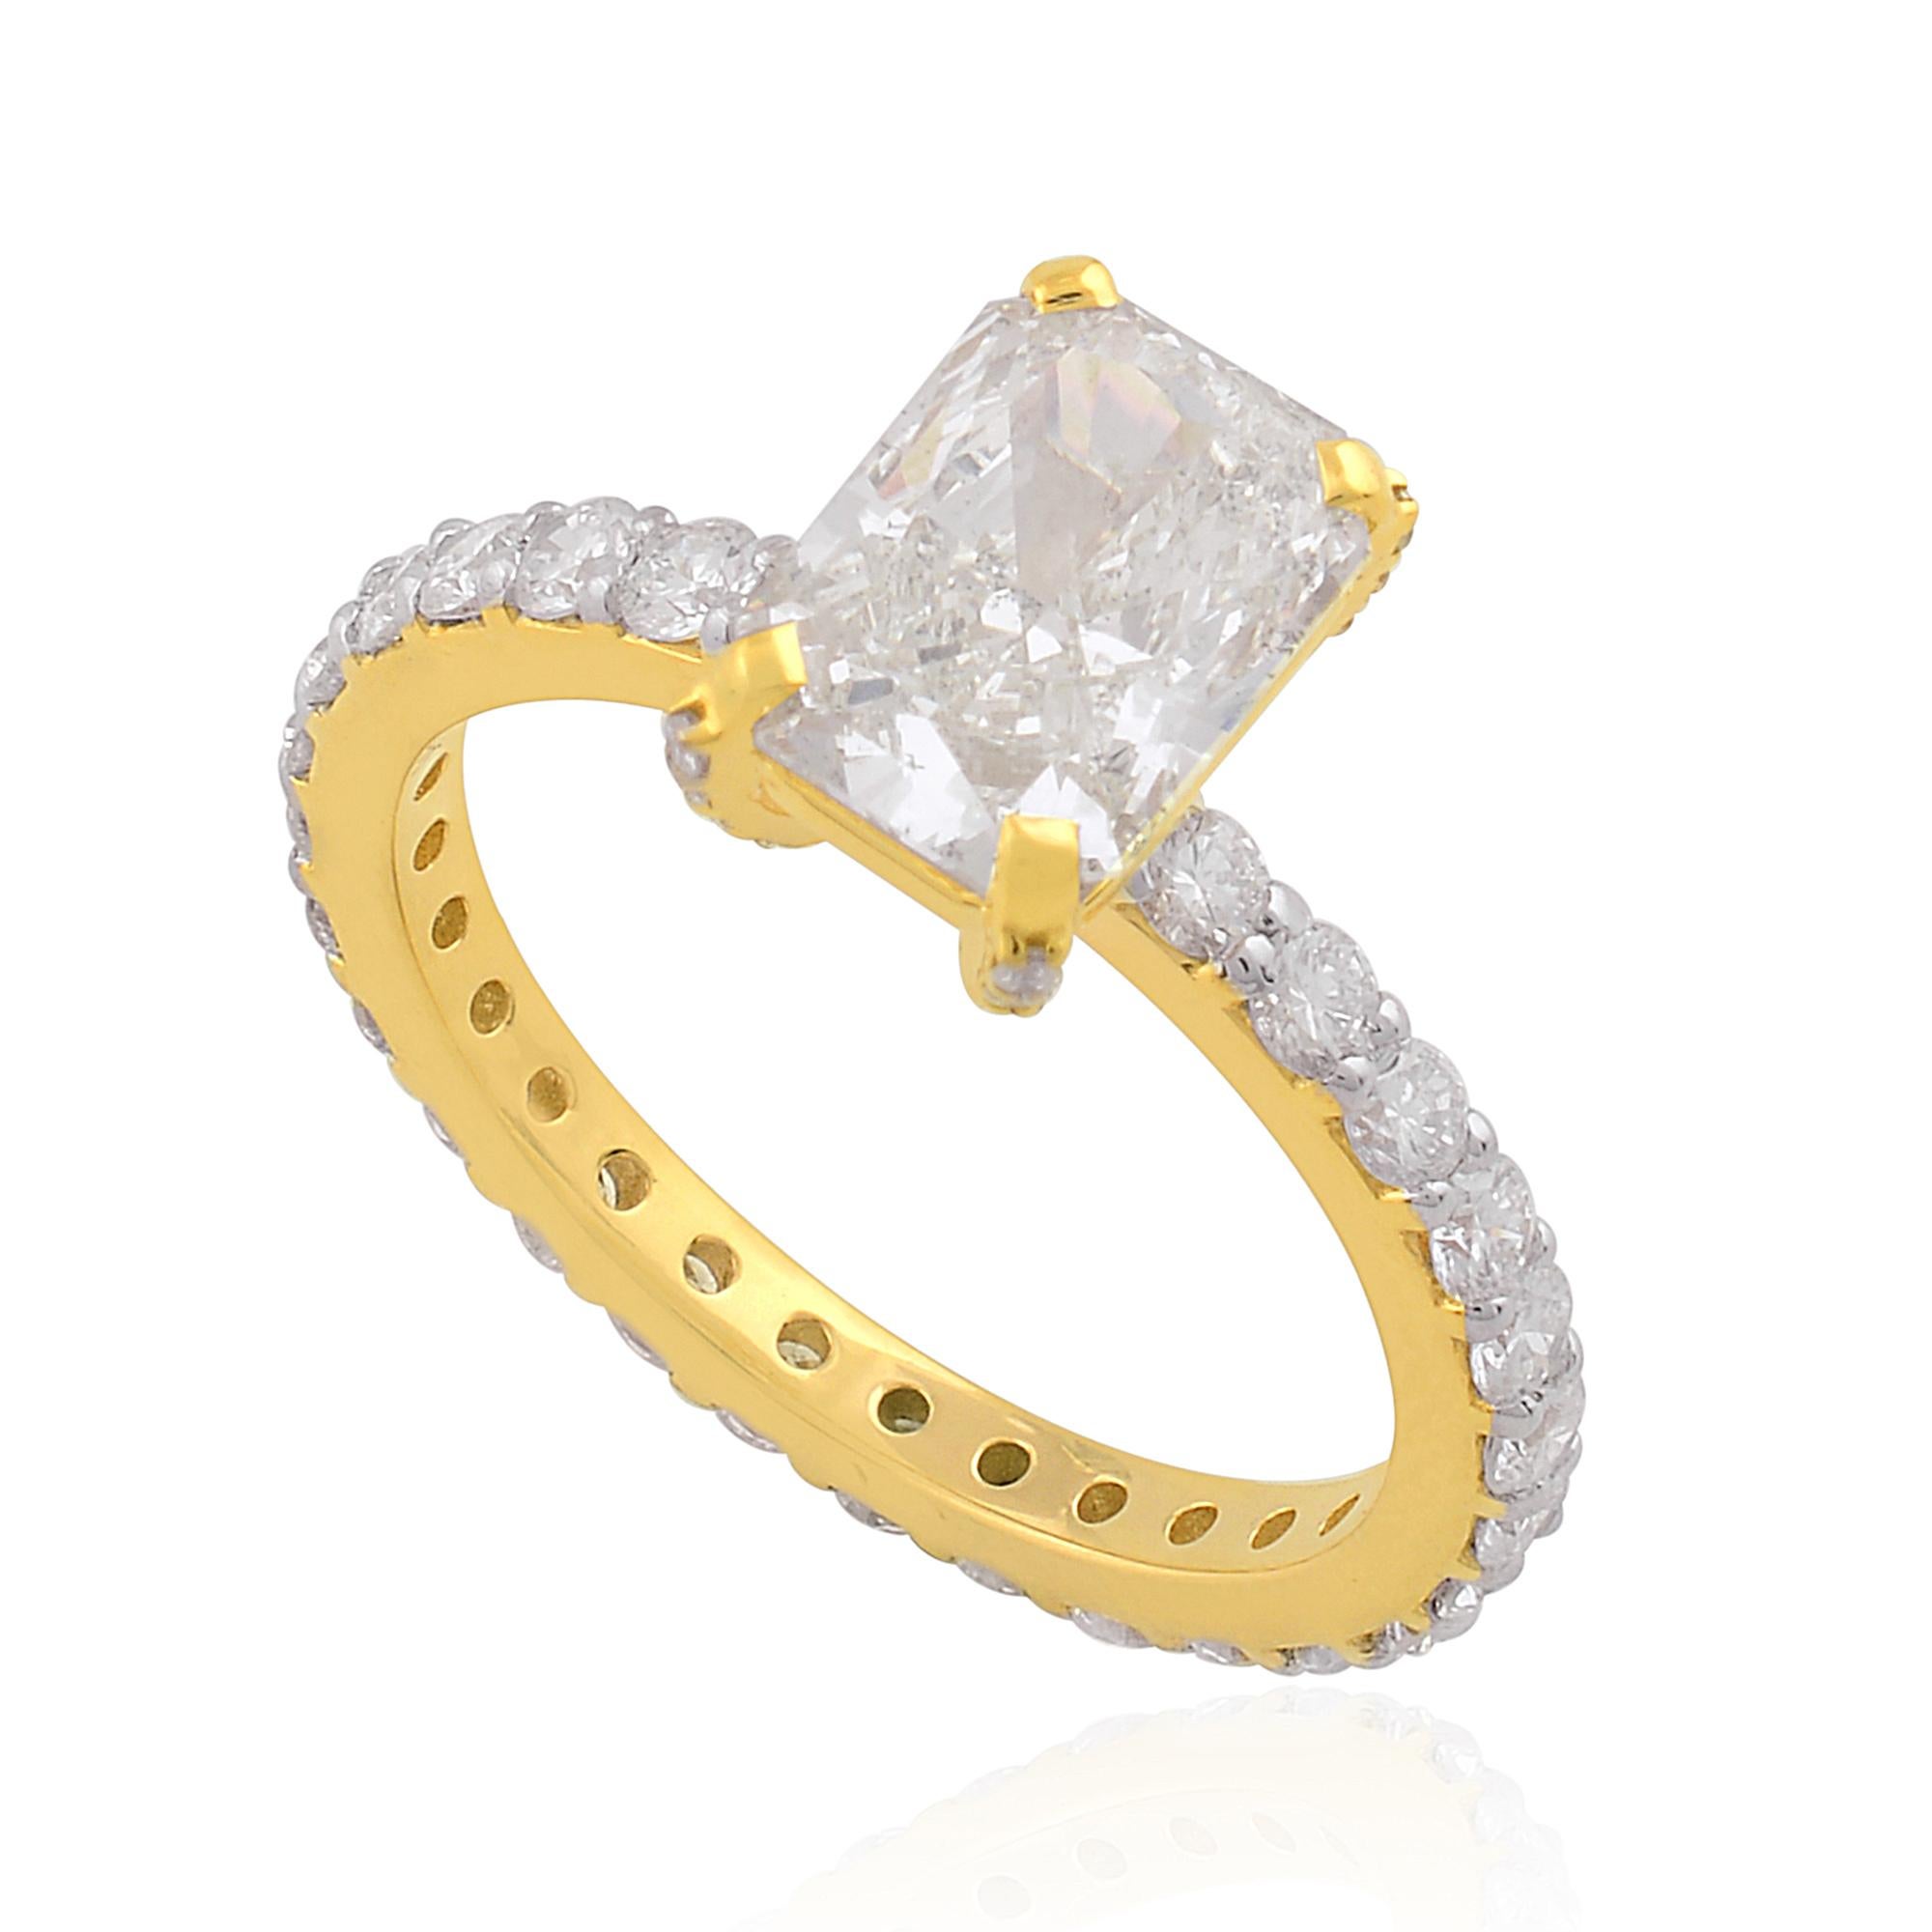 For Sale:  SI Clarity HI Color Solitaire Diamond Band Ring 18 Karat Yellow Gold Jewelry 2